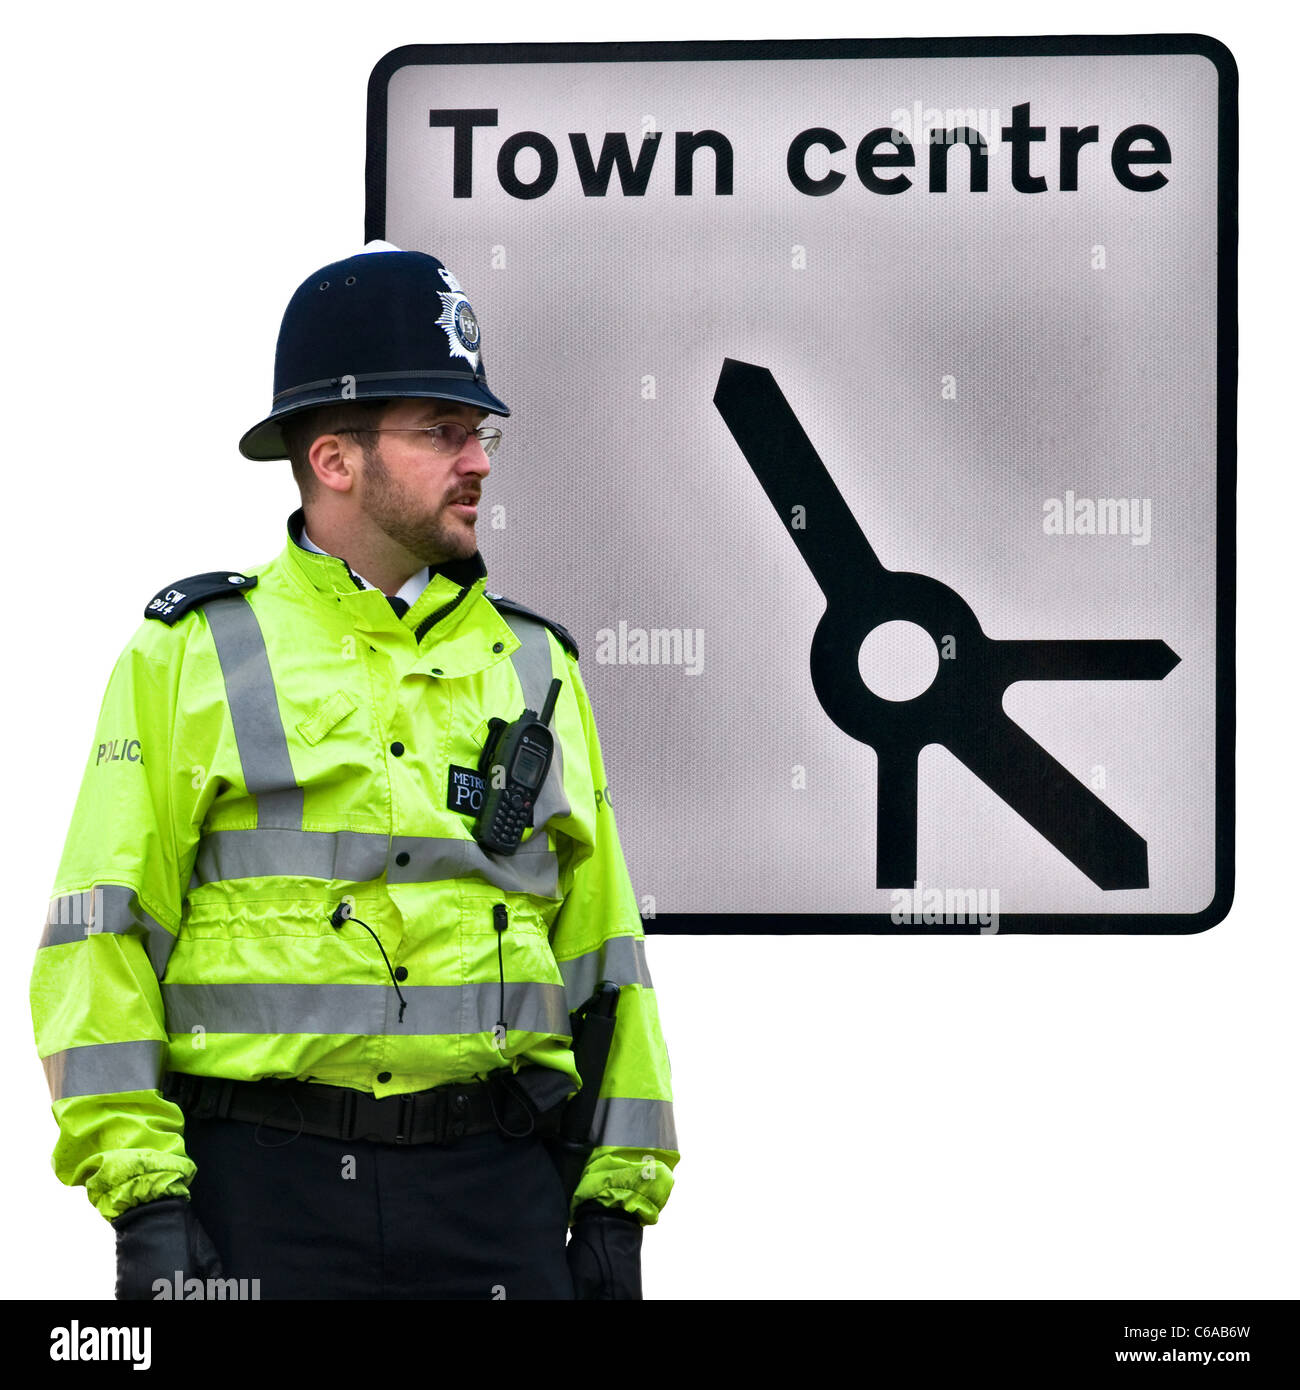 Road sign pointing to the town centre (includes roundabout detail), Standing policeman / police officer cut out England, UK Stock Photo